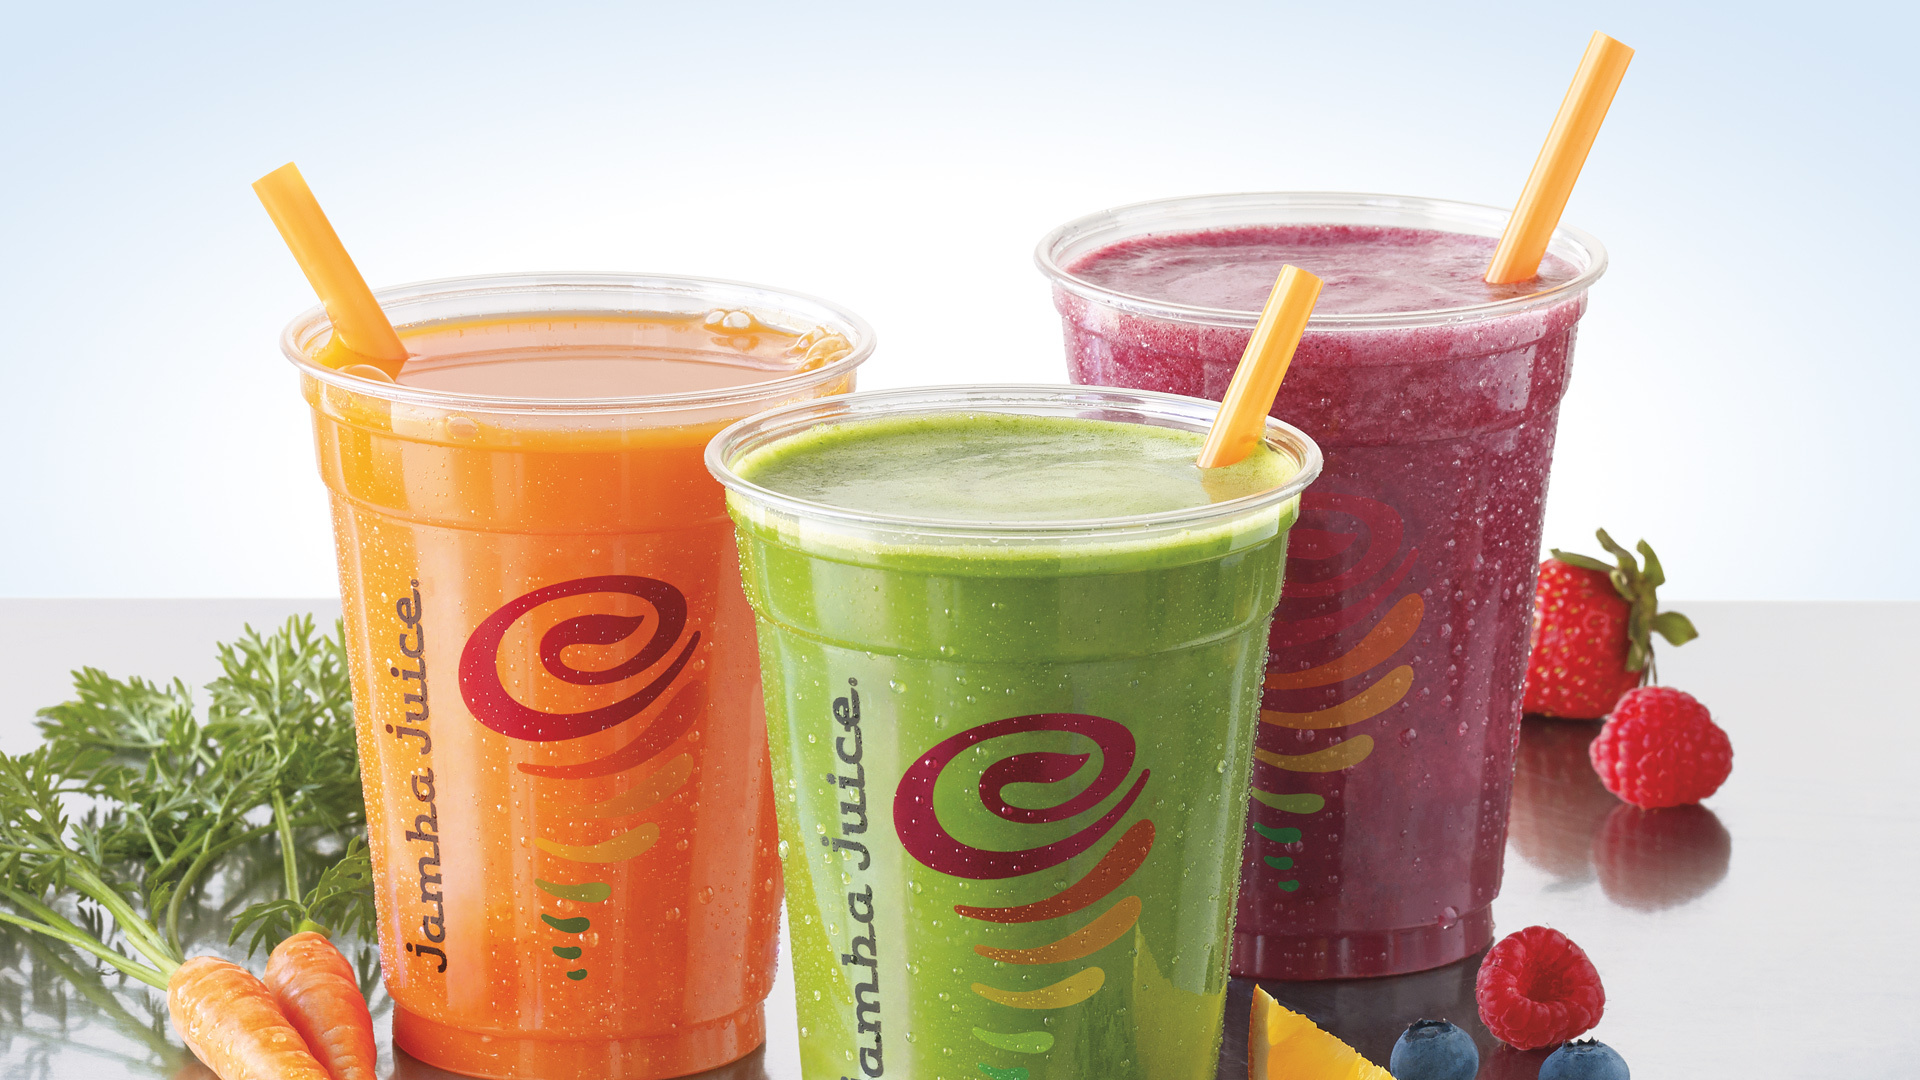 Jamba Juice Gives Away Nearly Half A Million Servings Of Fruit And